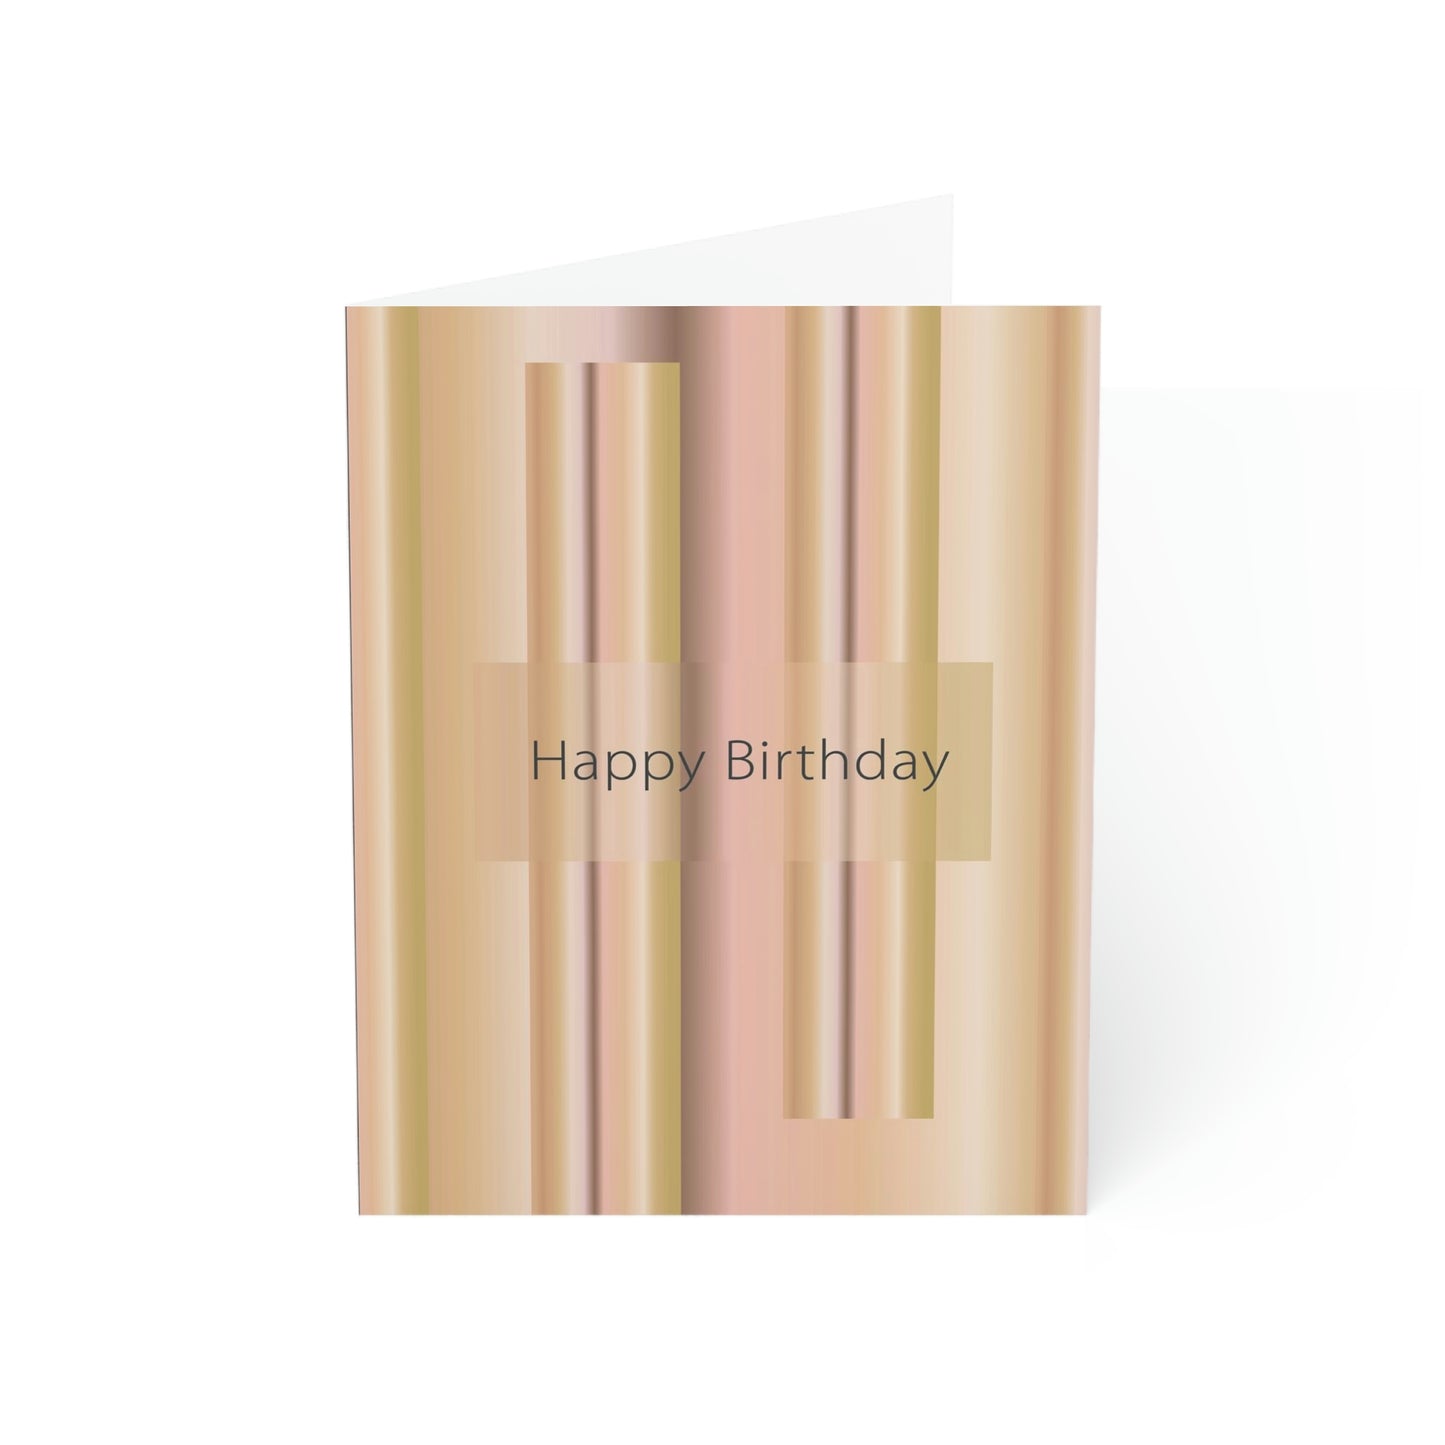 Folded Greeting Cards Vertical (1, 10, 30, and 50pcs) Happy Birthday  - Design No.100